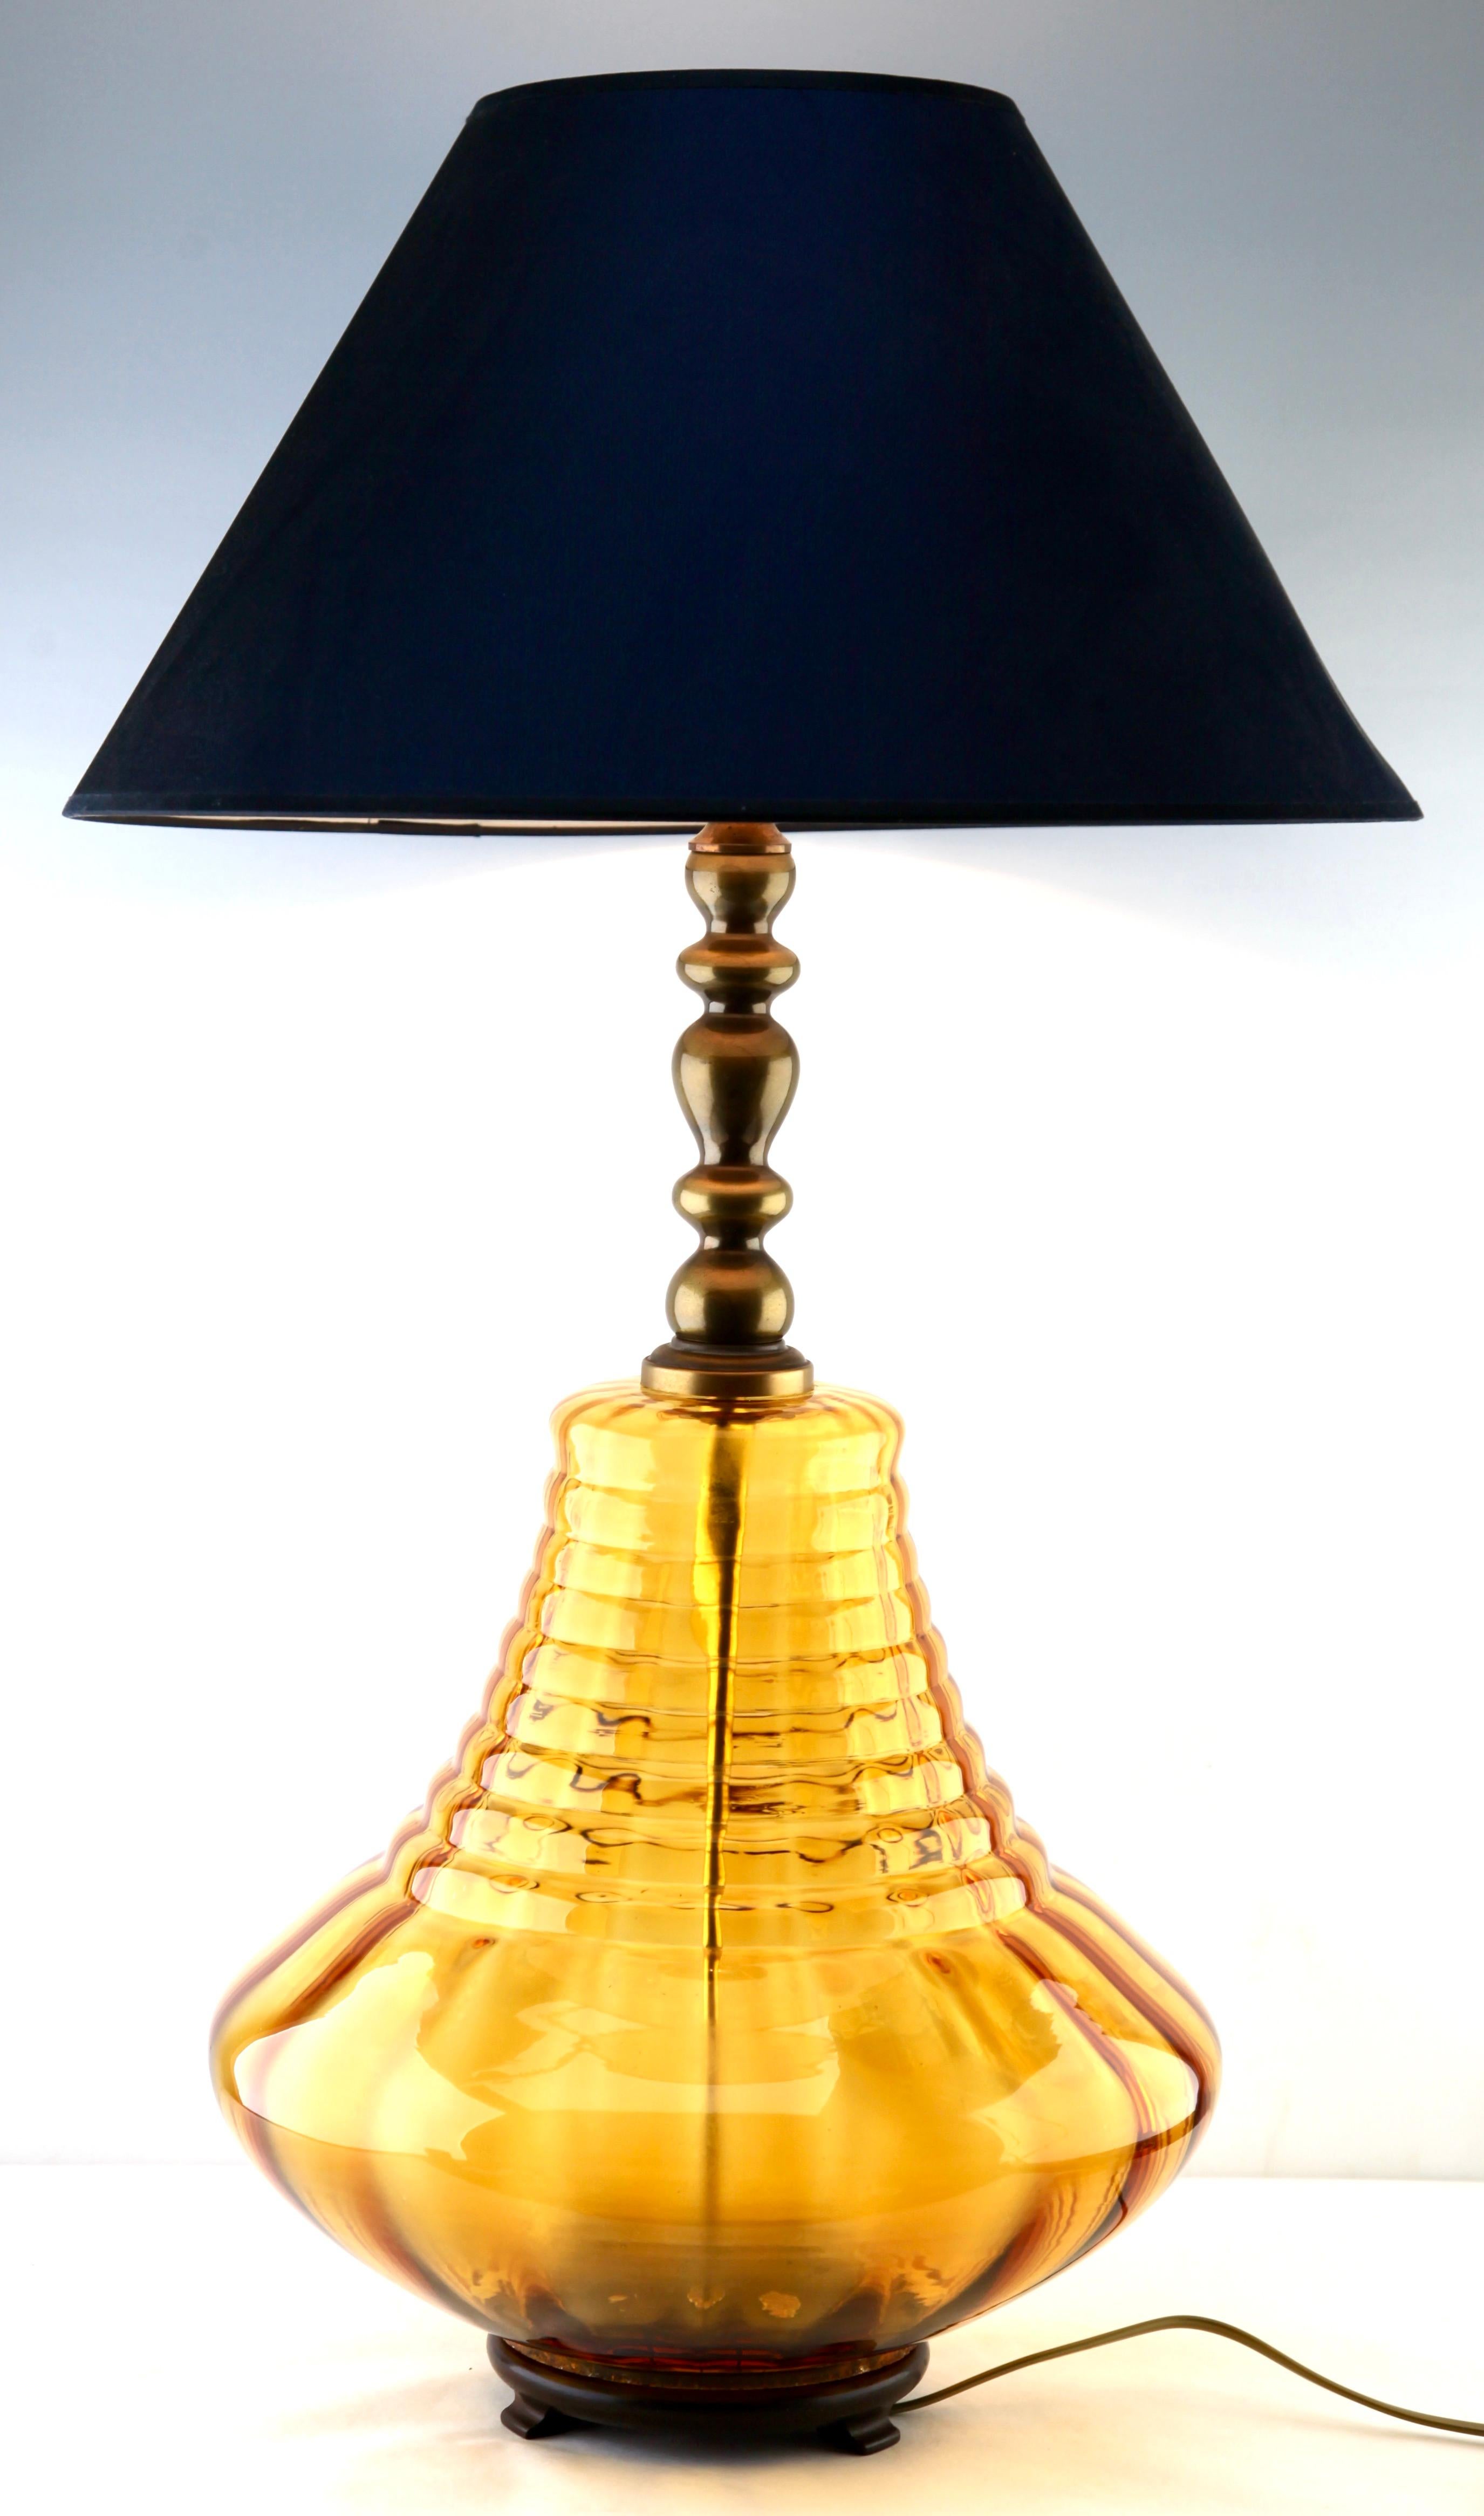 Hand-Crafted Empoli Glass Table Lamp with Optical Vertical-Horizontal Ribs Light Amber Tint For Sale